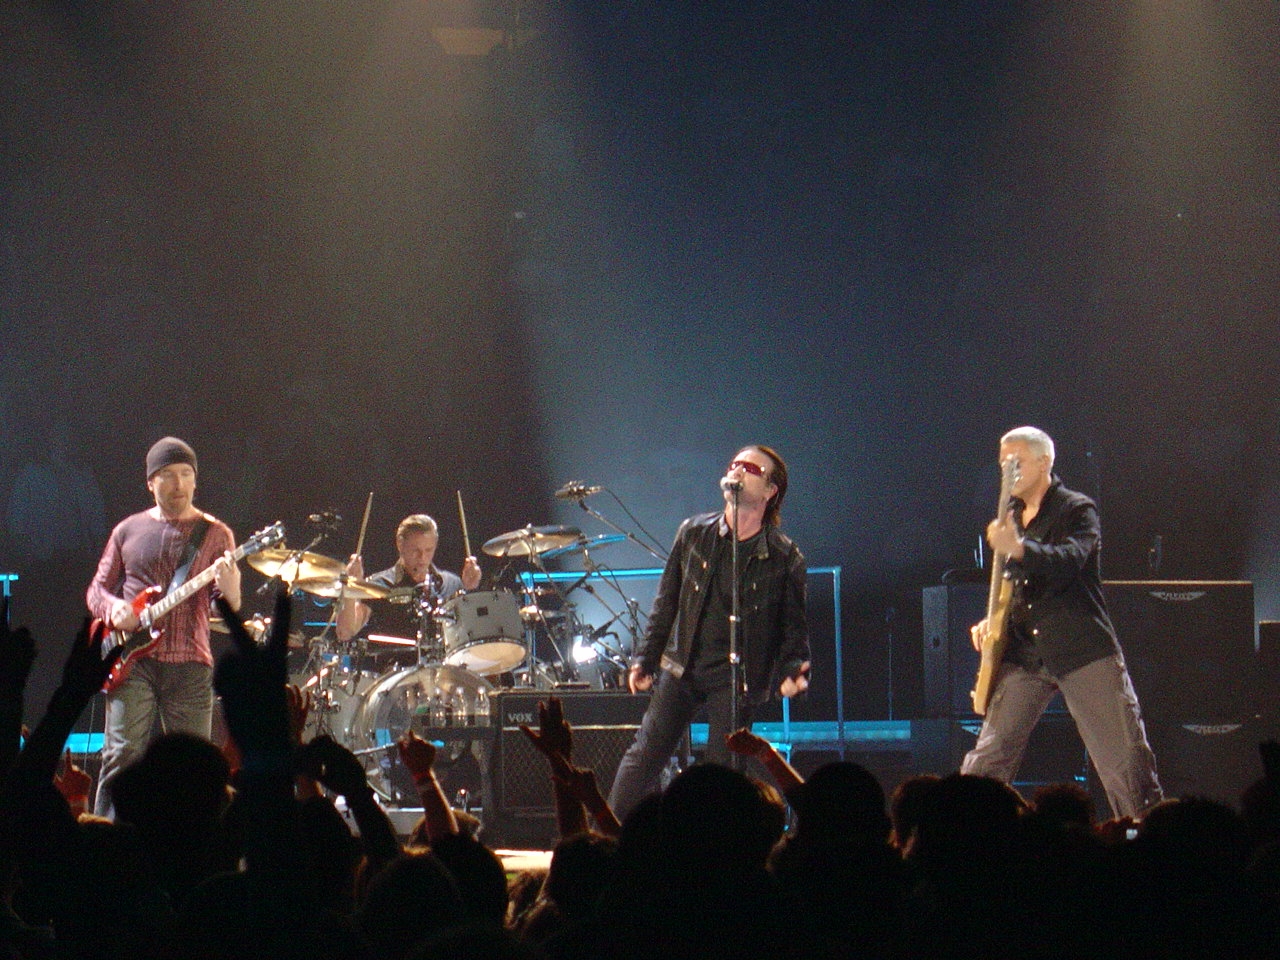 Faith, hope and U2: the language of love in the music of U2